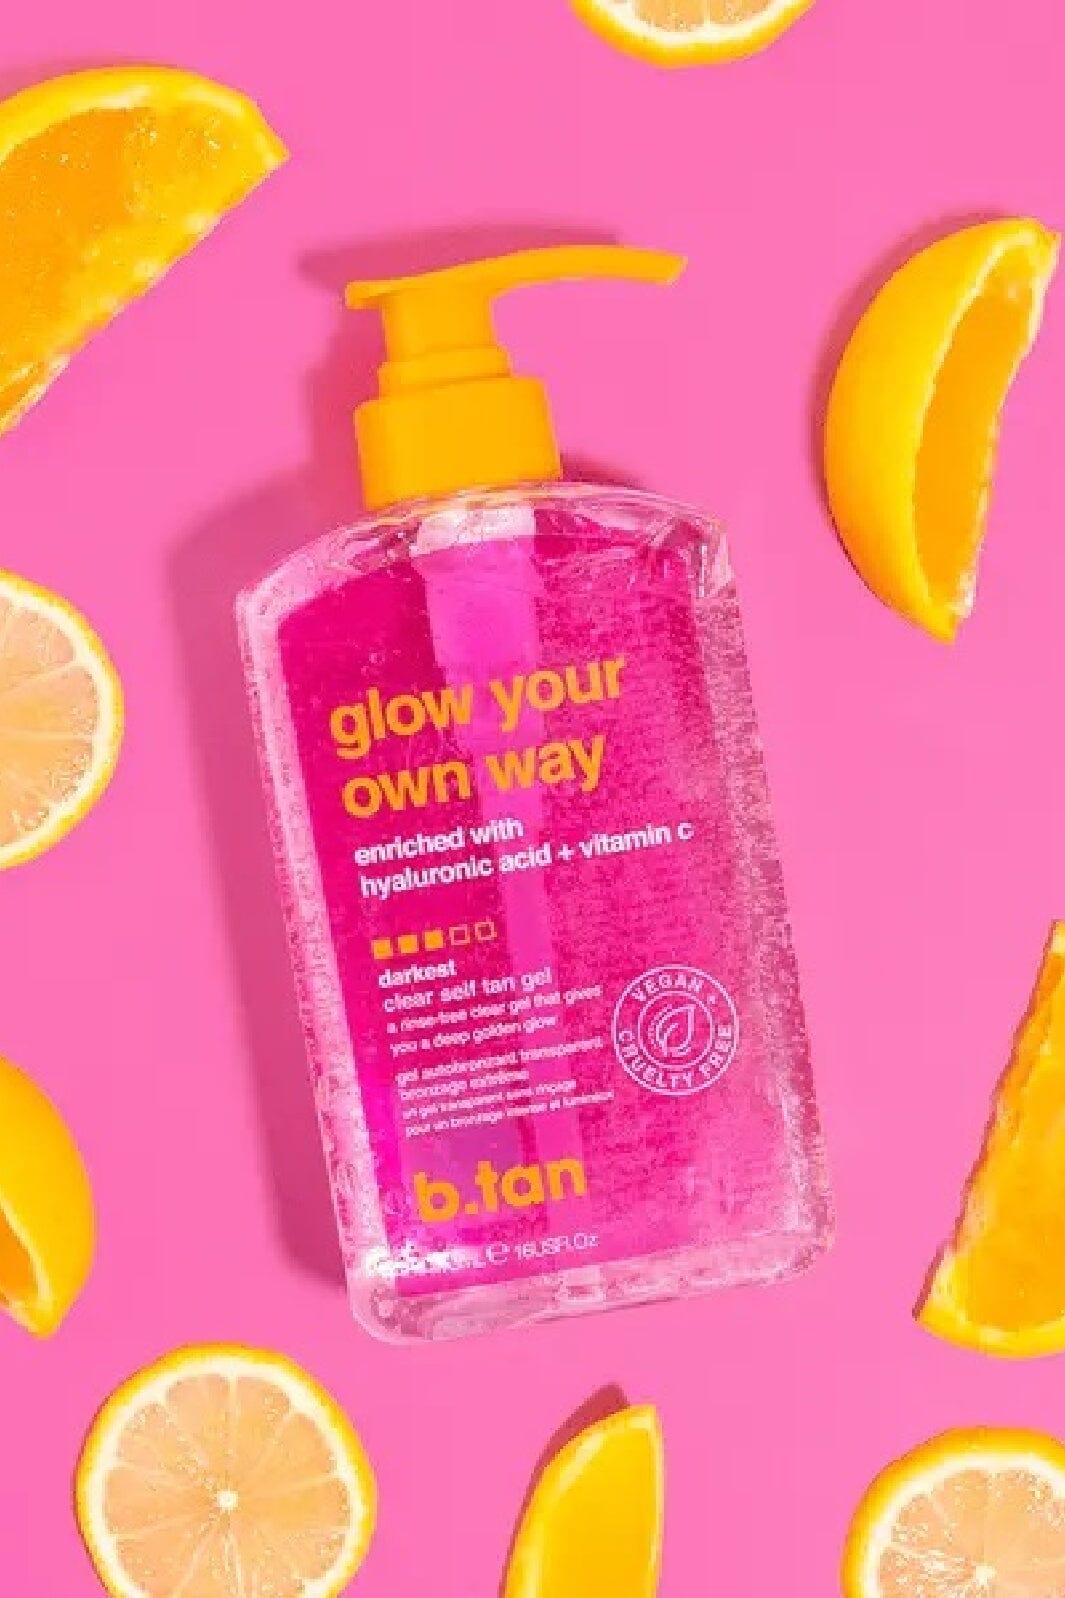 B.tan - Glow Your Own Way - Clear Tanning Gel Selvbruner 